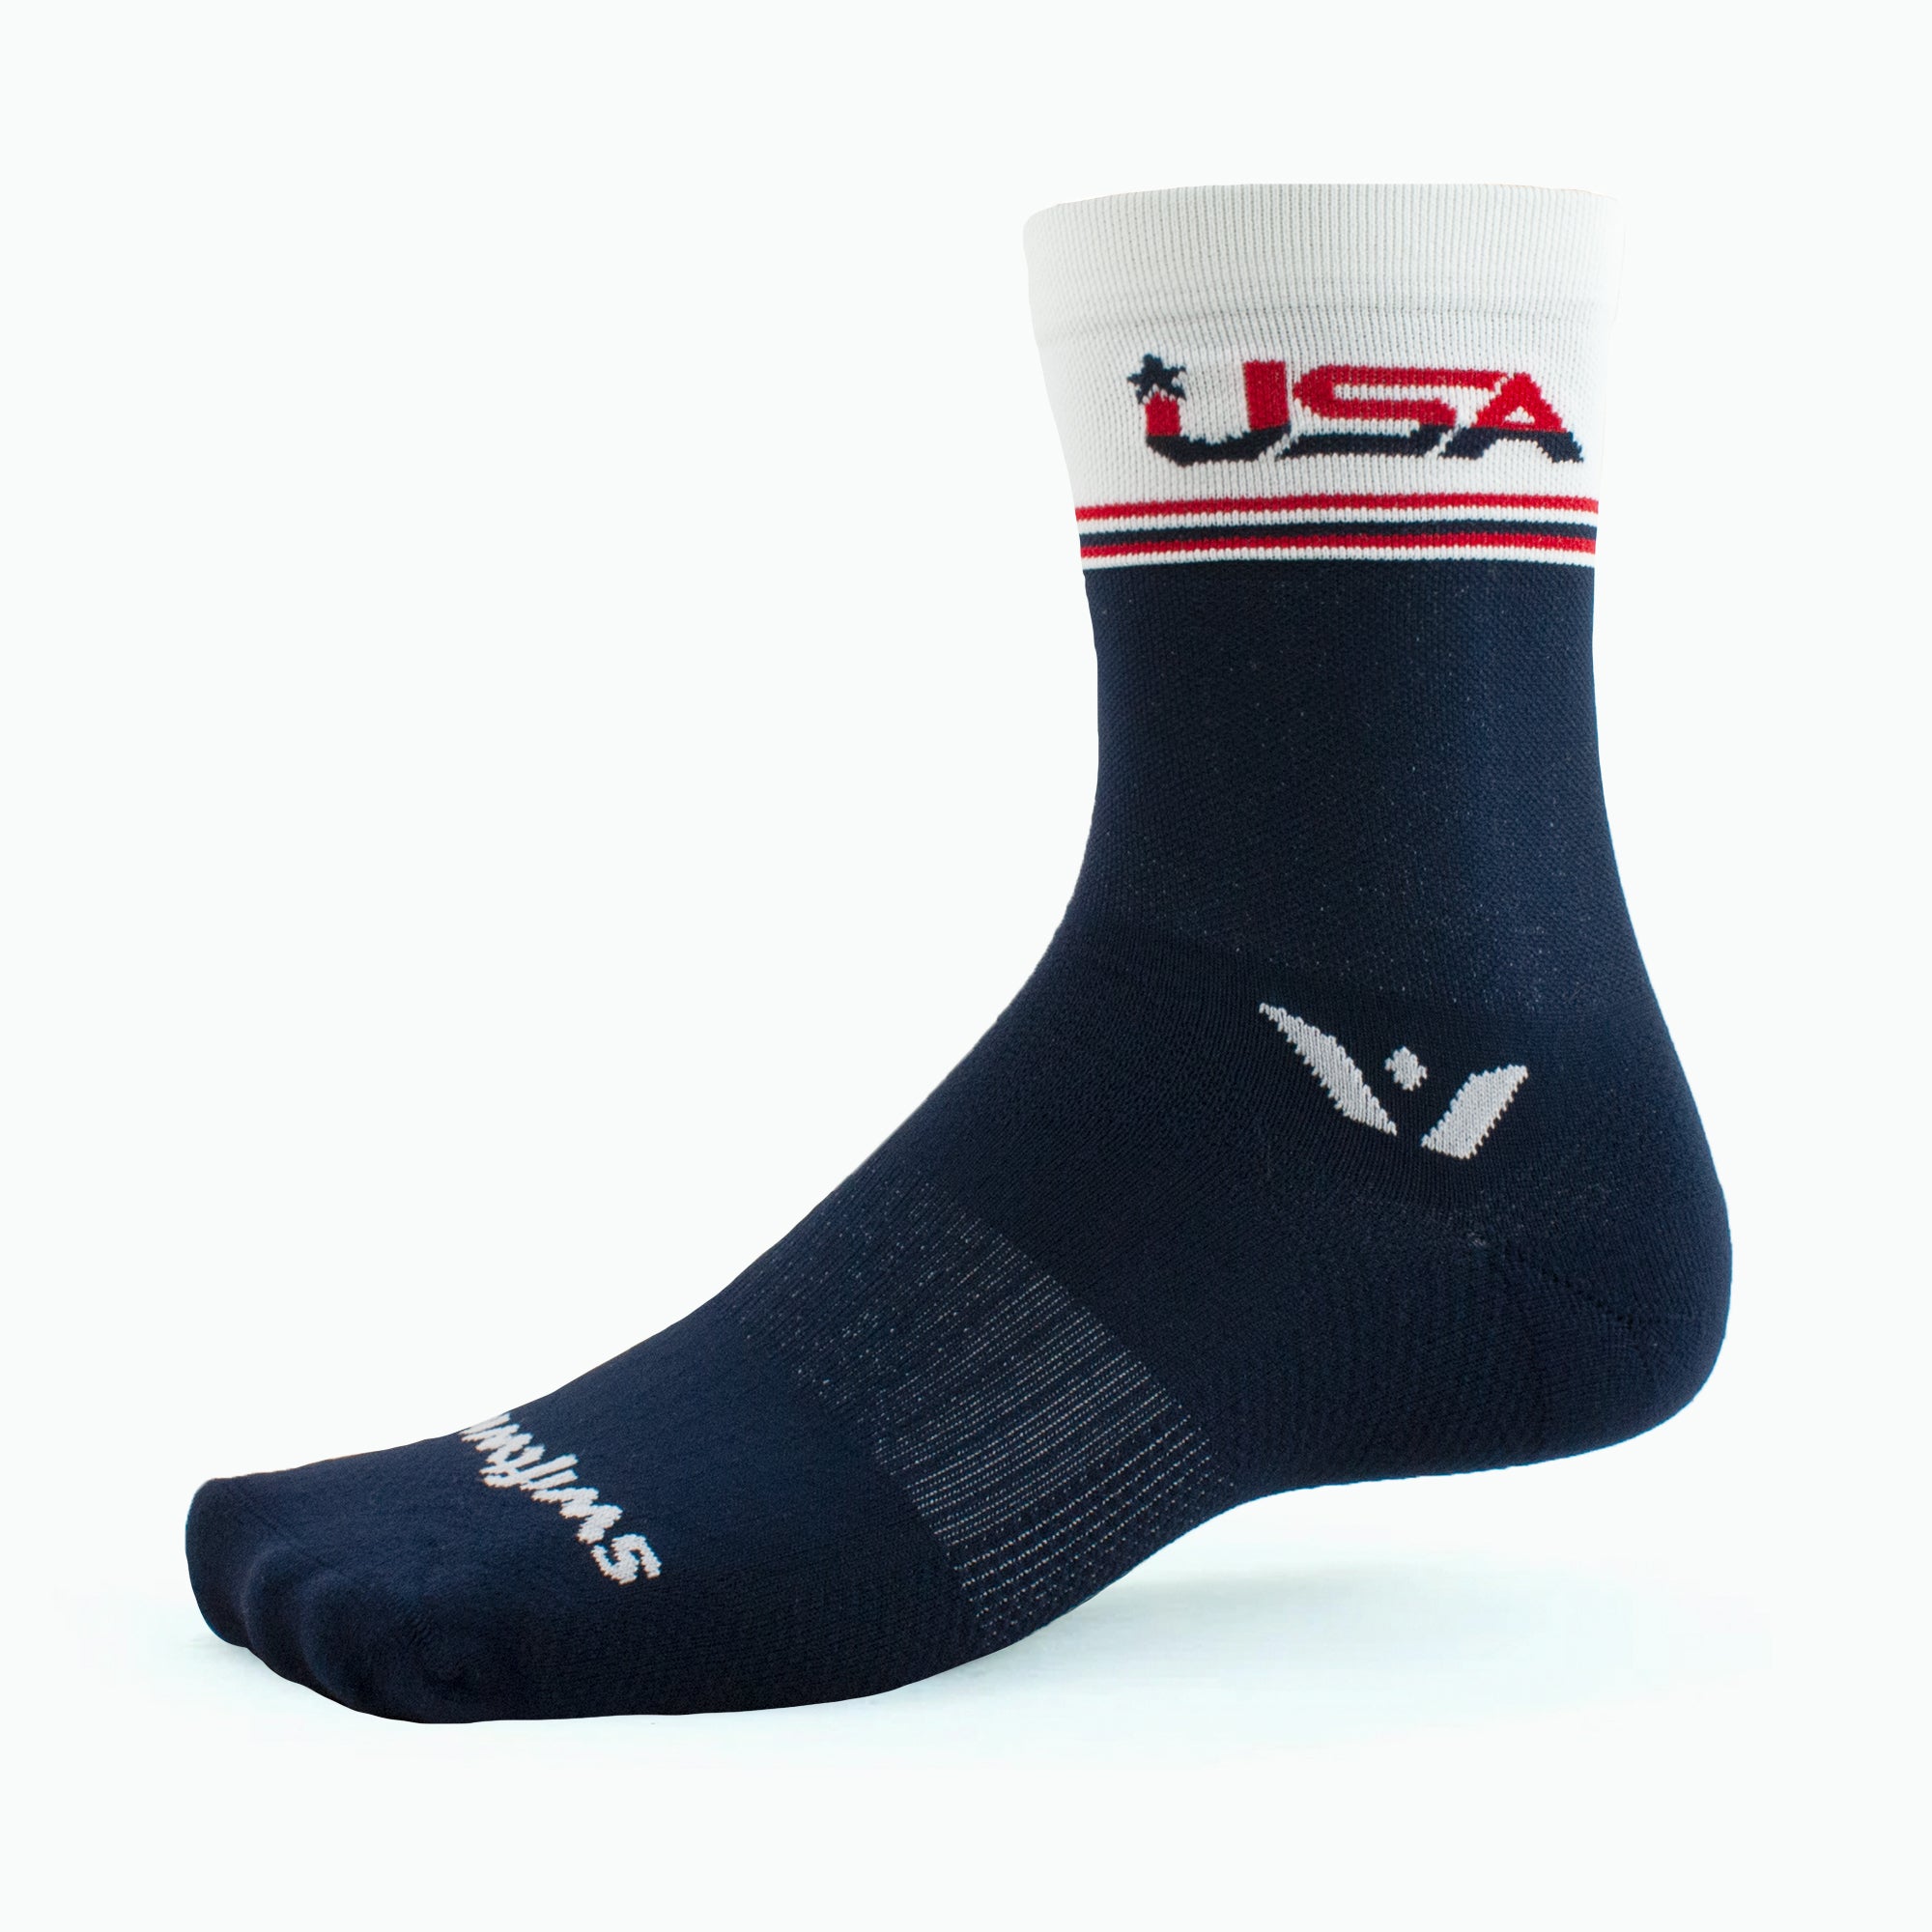 Swiftwick VISION Five Tribute - Cycling & Running Sock